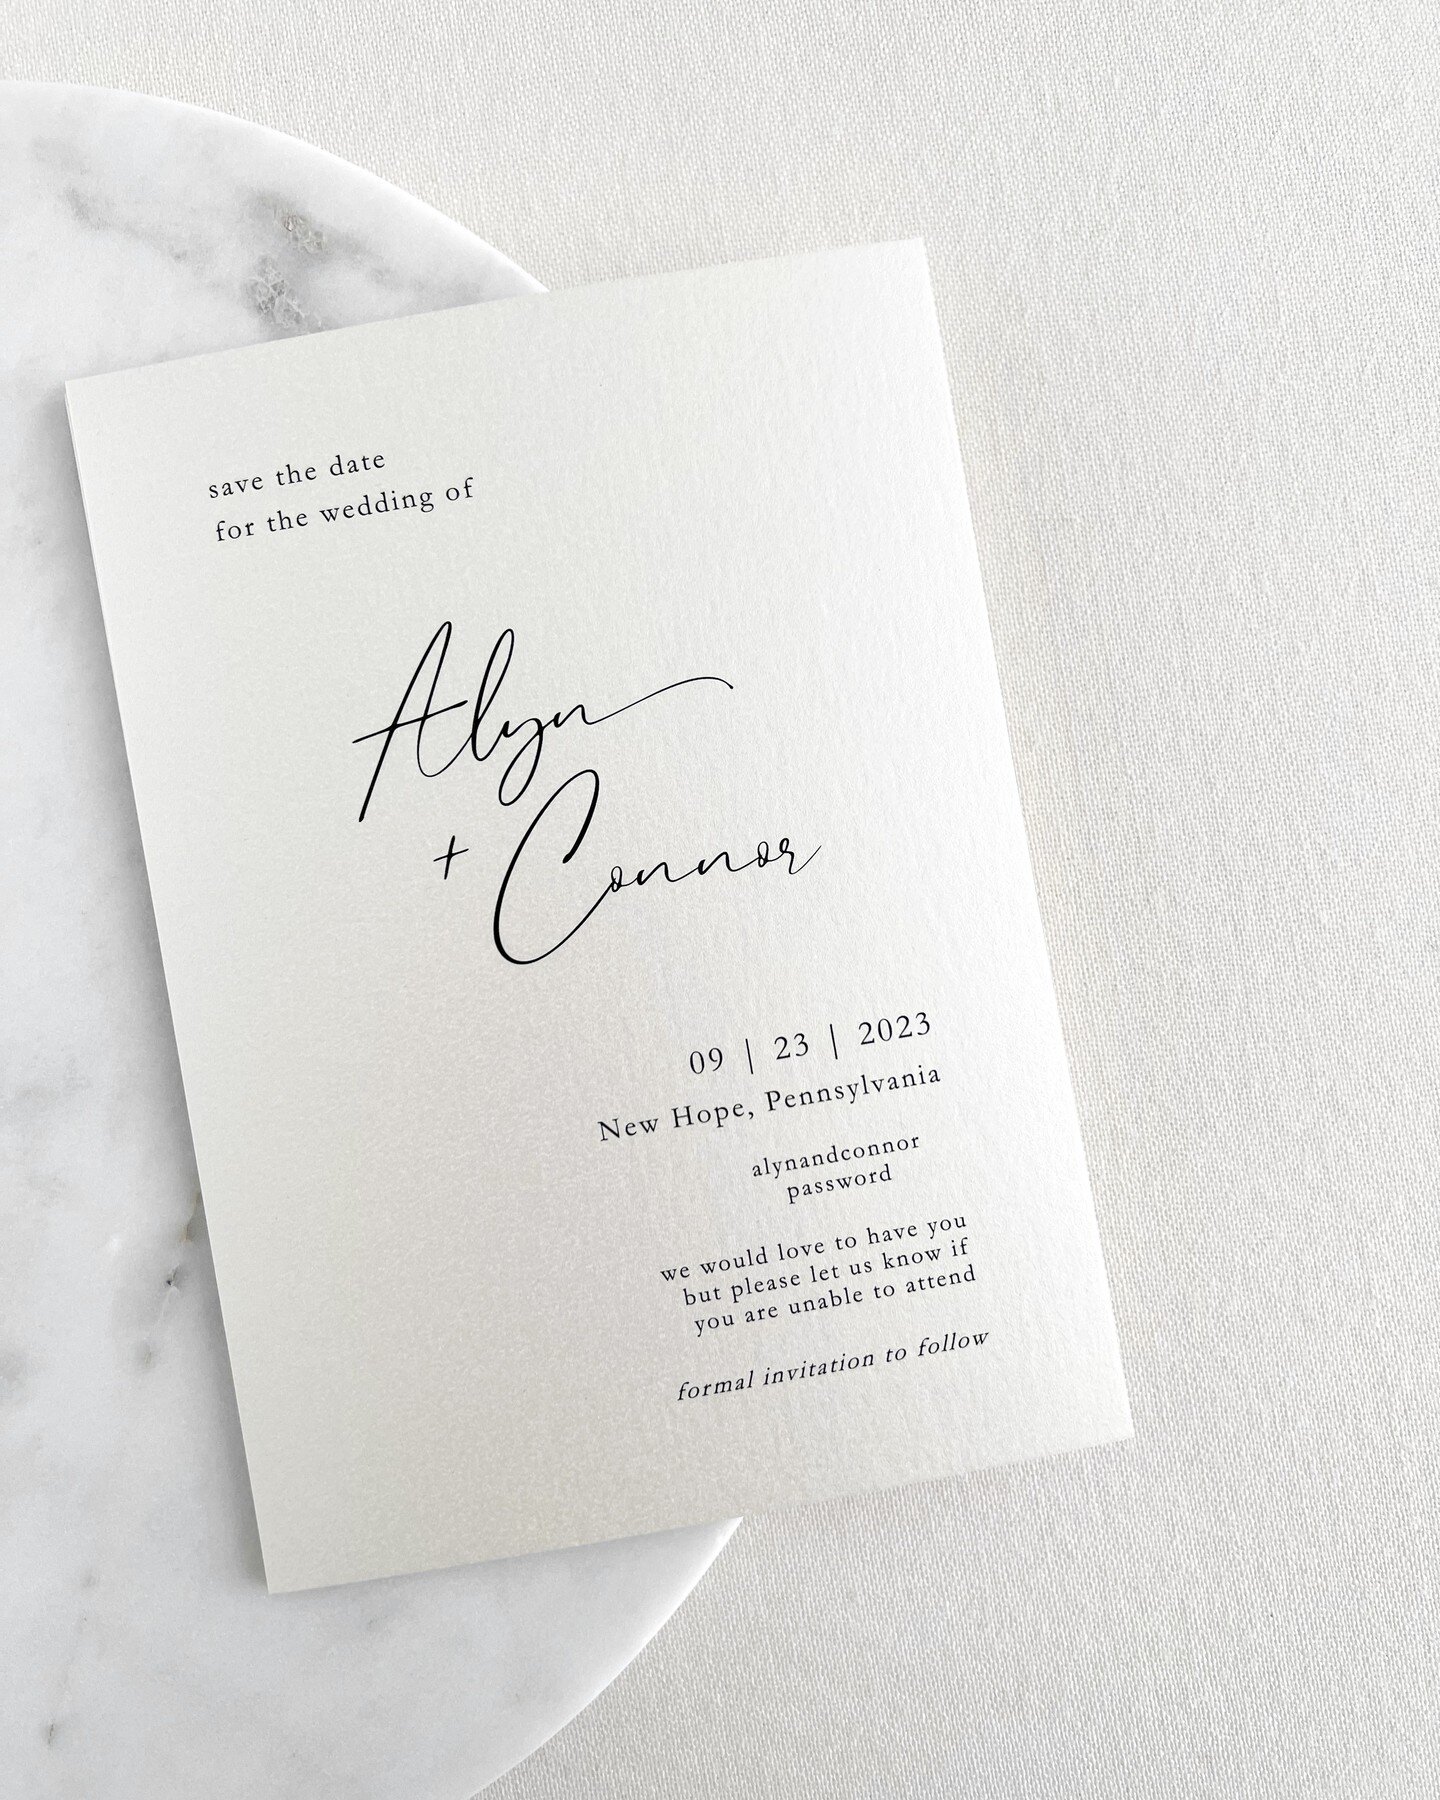 Our Savannah semi-custom Save the Date, customized for A+C. We opted for metallic Opal cardstock to elevate this set - a beautiful champagne color that is a great alternative to a flat white stock. ✨ #savethedate #metallic #weddinginvitations #weddin